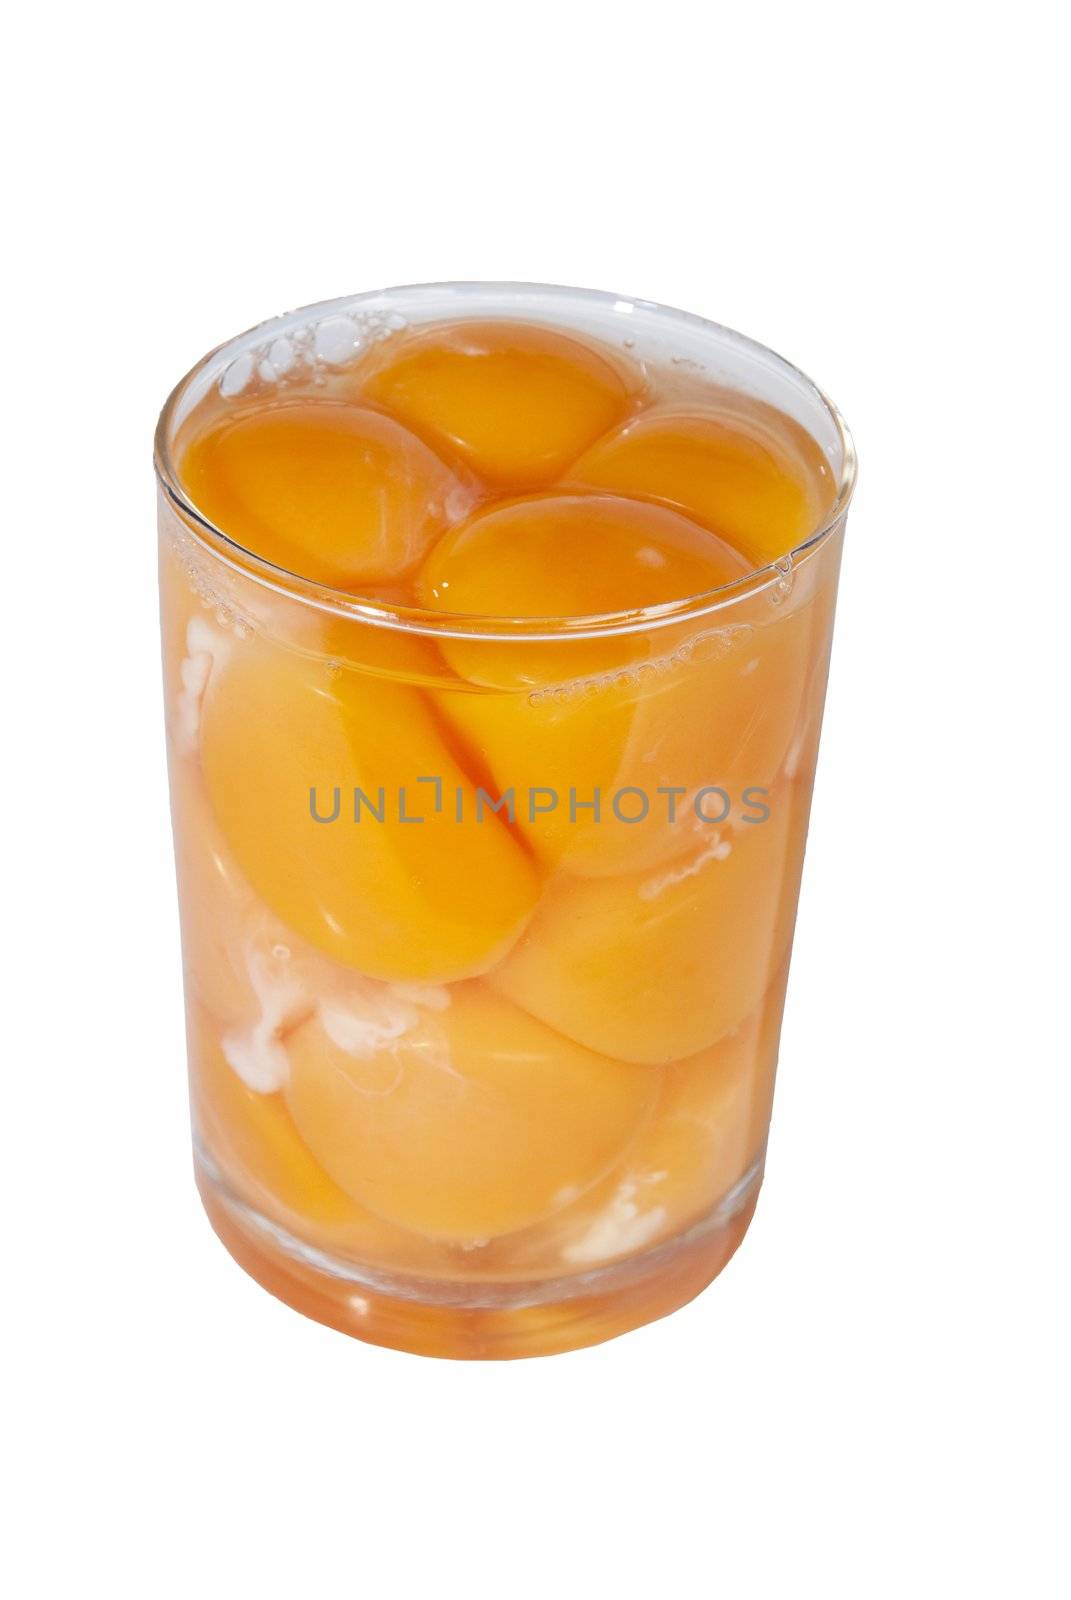 Yolks of eggs are in glass